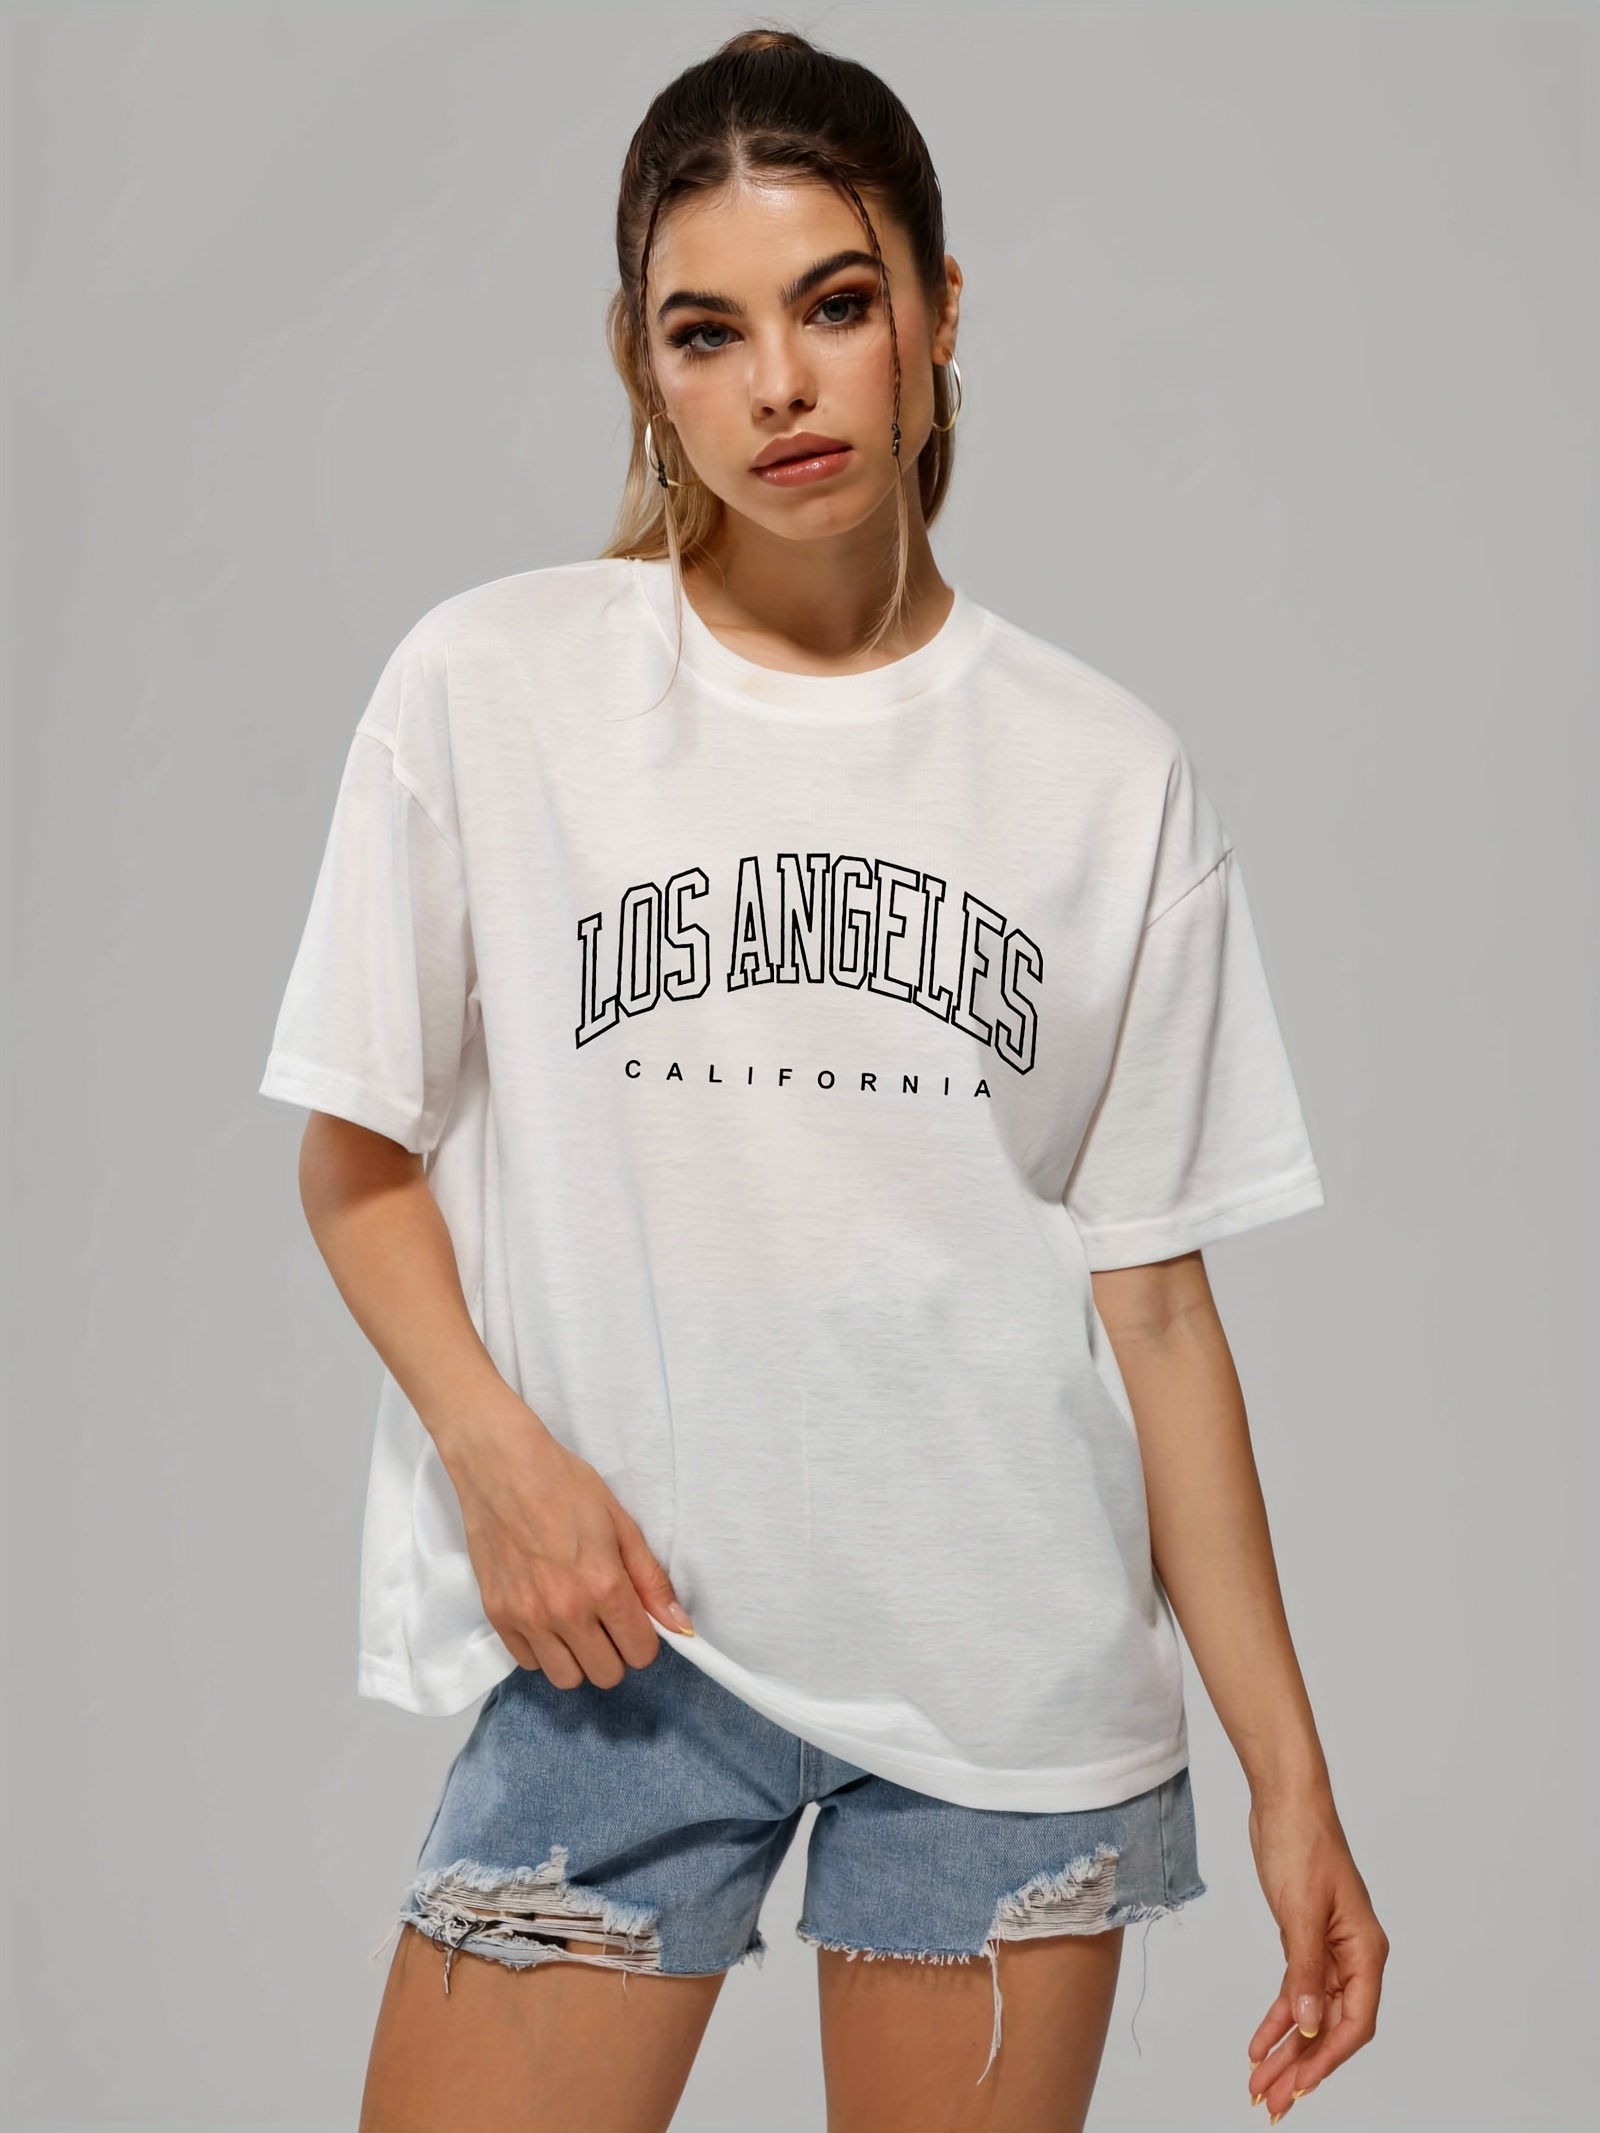 solid color letter print casual sports t shirt soft crew neck short sleeve tee womens clothing details 3